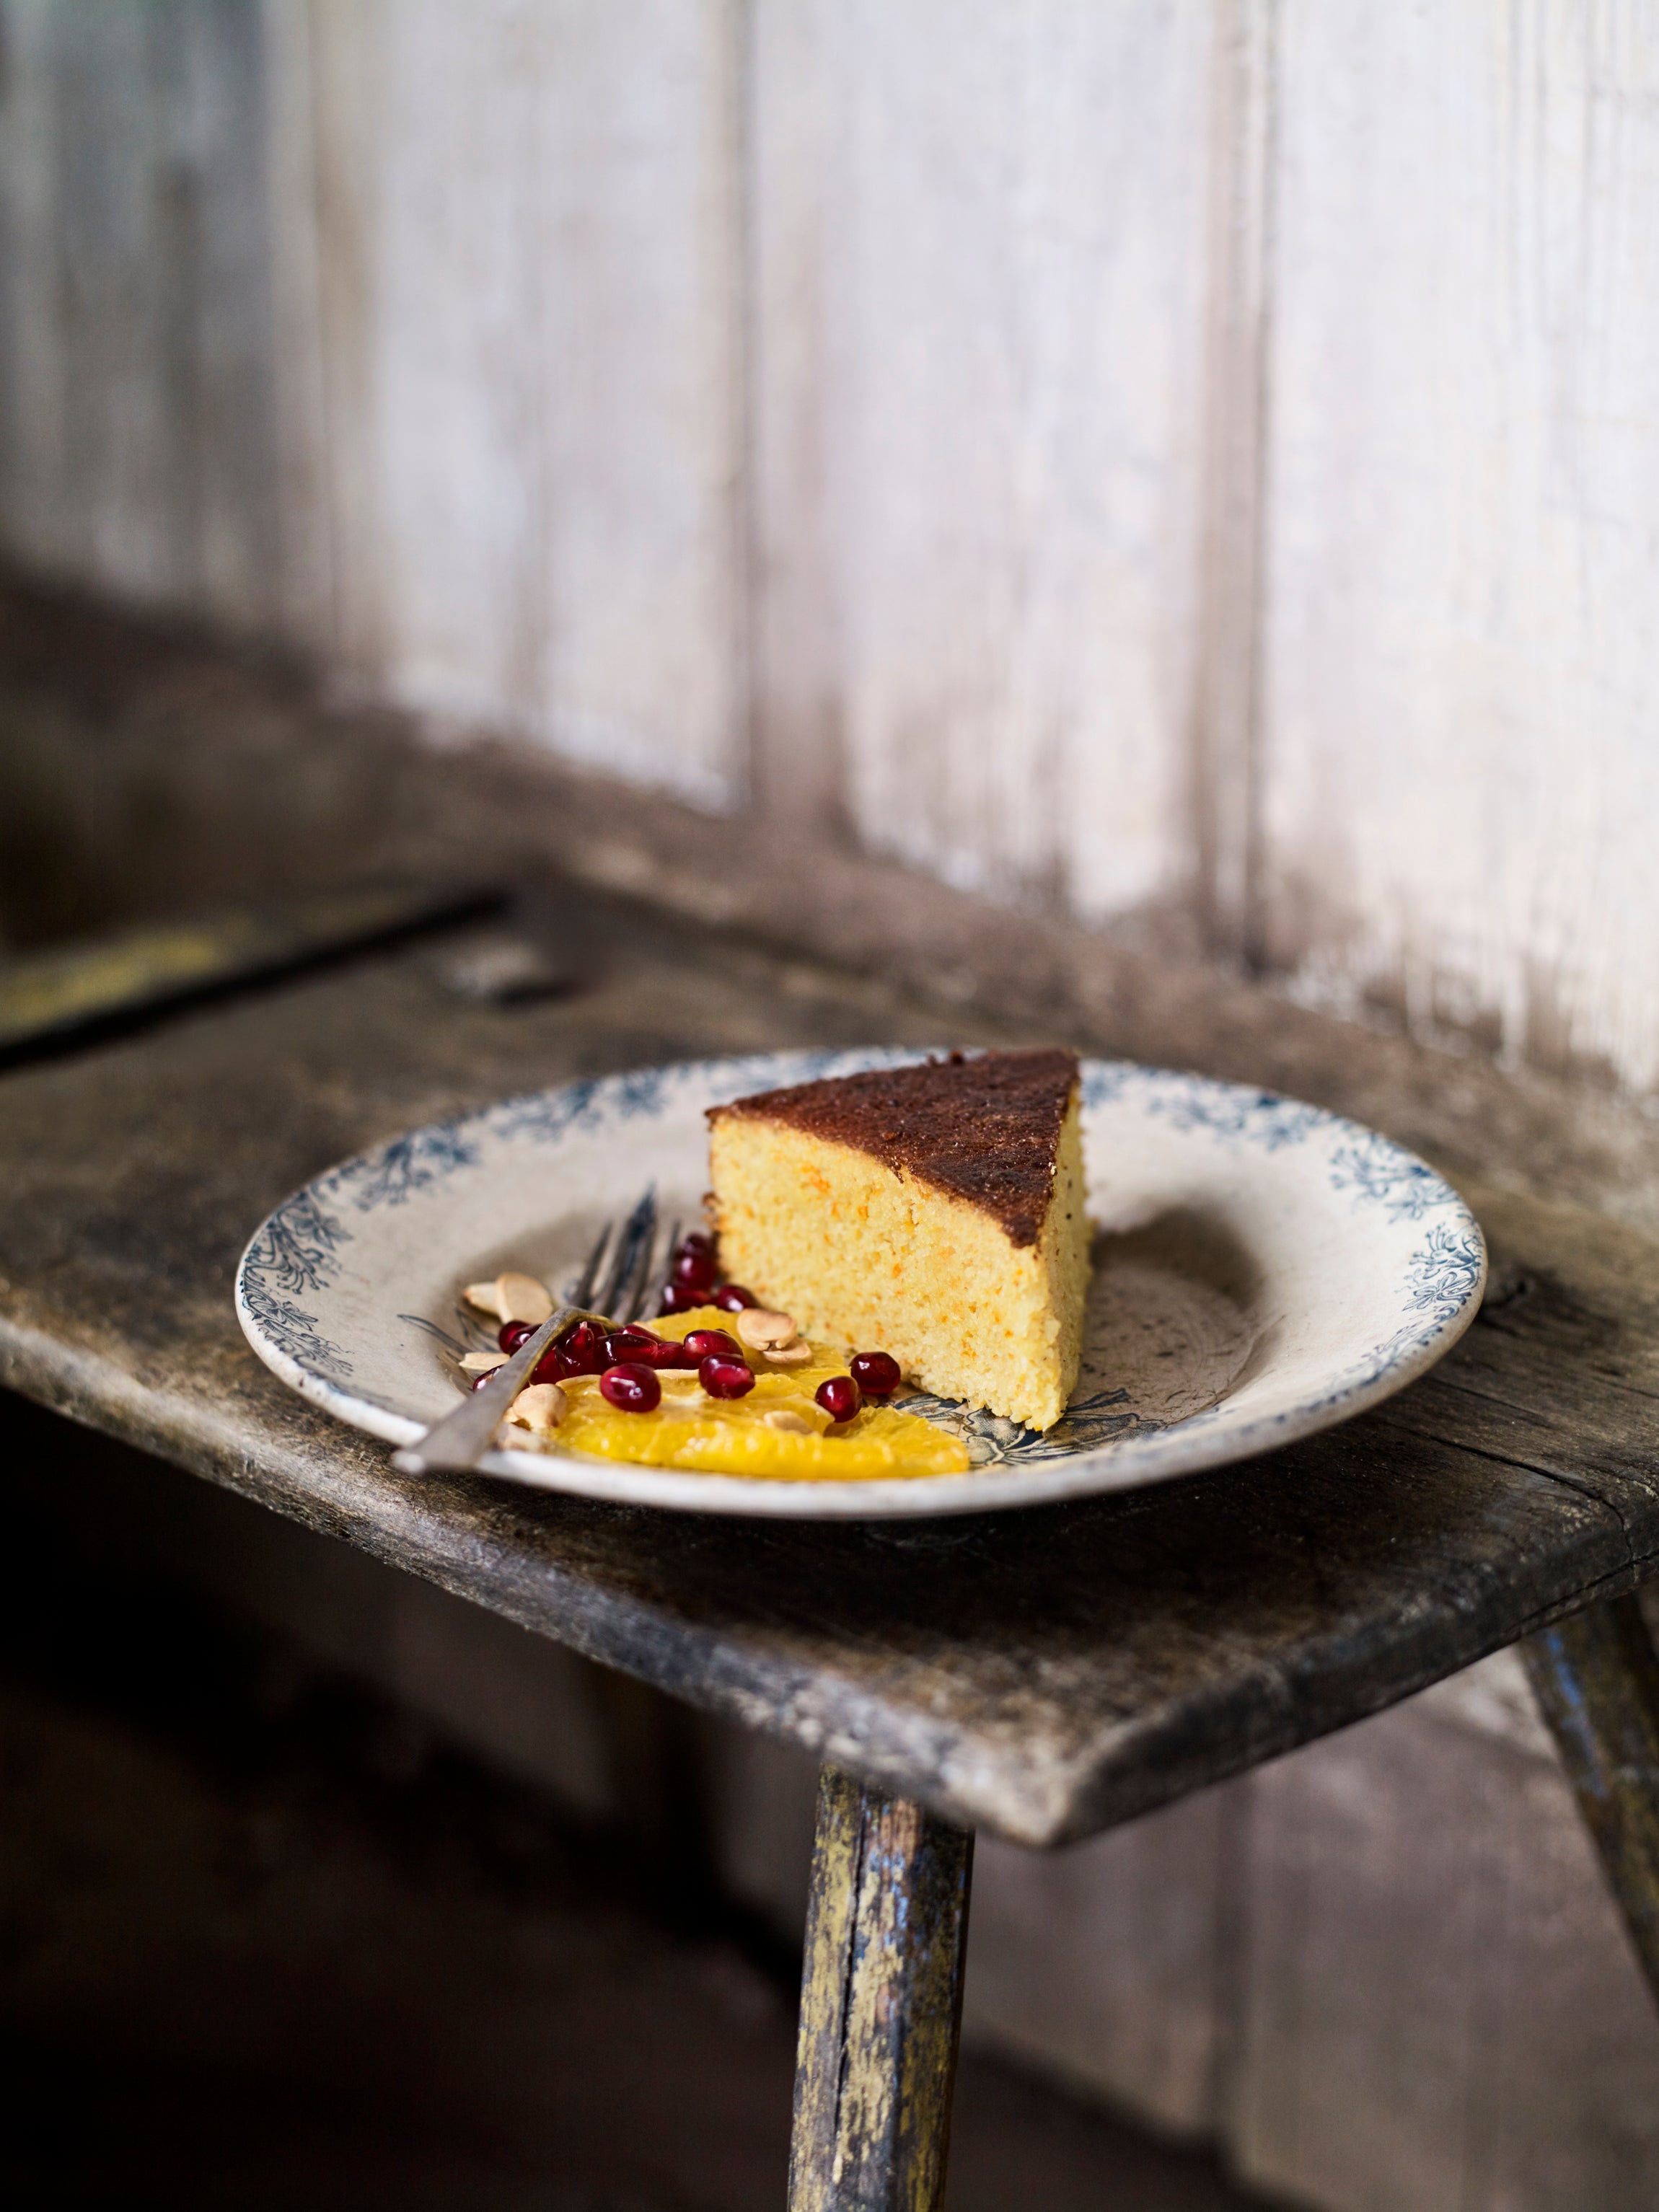 Clementine cake with an orange and pomegranate salad from Recipes From The Farm (Andrew Montgomery/PA)